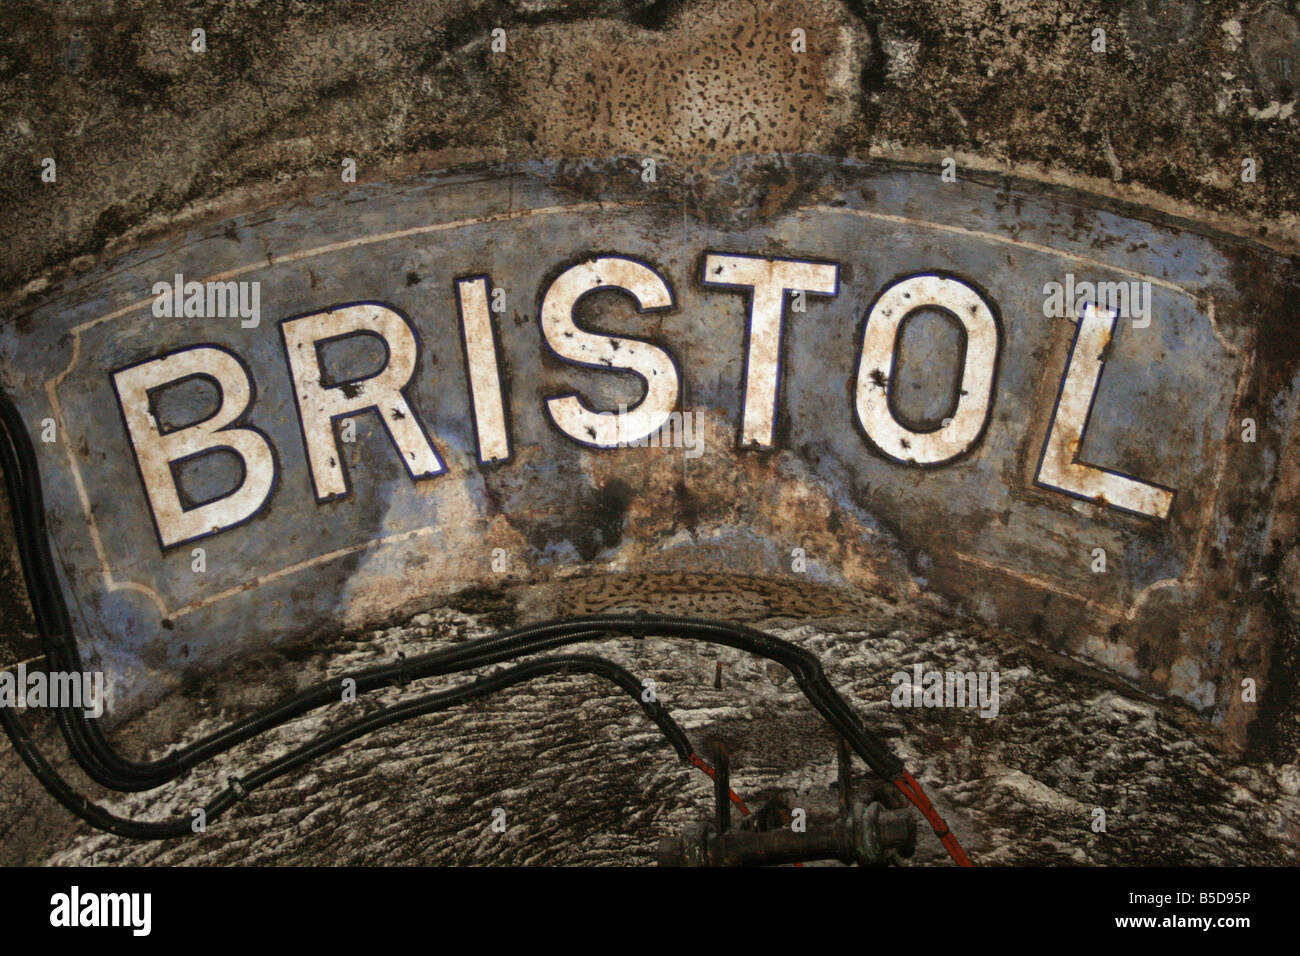 Bristol old sign at Moet et Chandon Cellars Head Office, Epernay France Horizontal. 50655 Epernay2005 Stock Photo